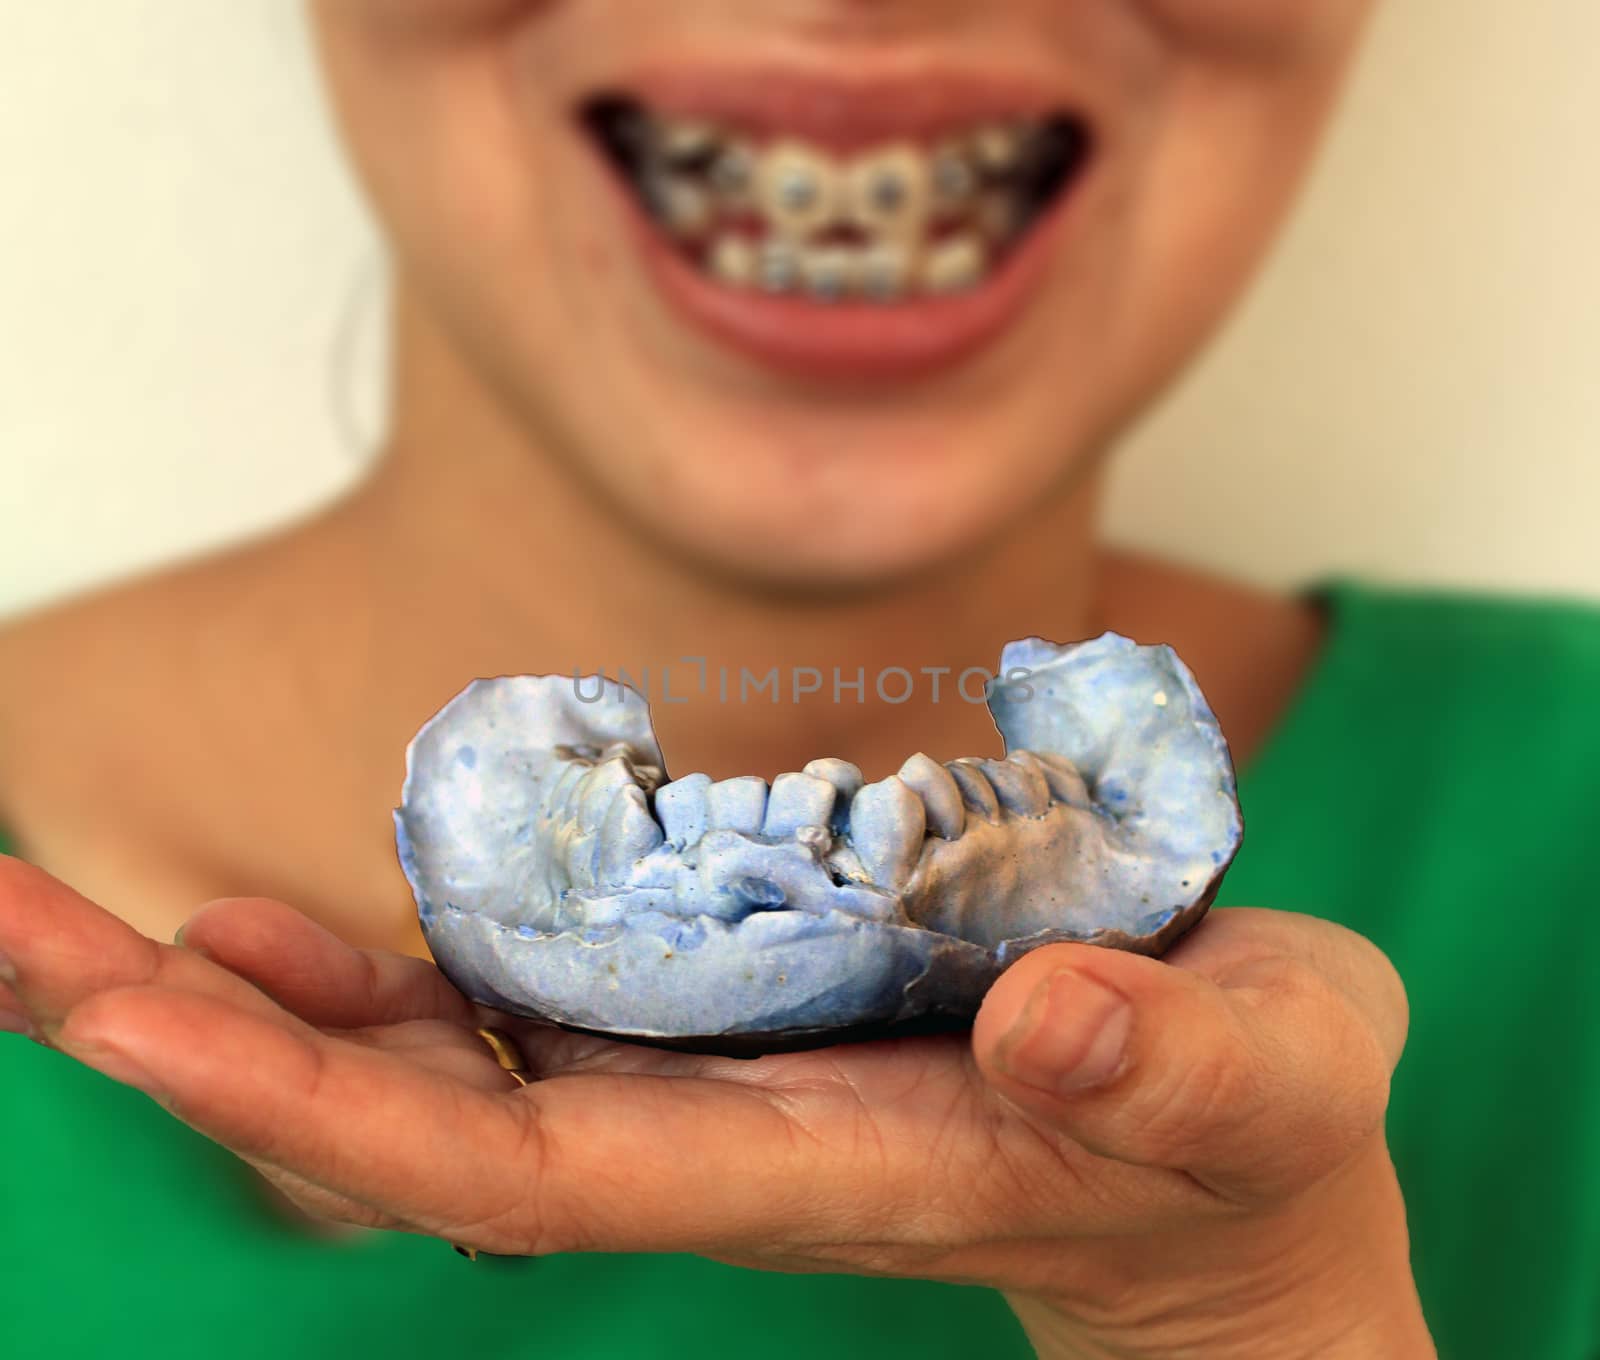 dental arch plaster mold and brace